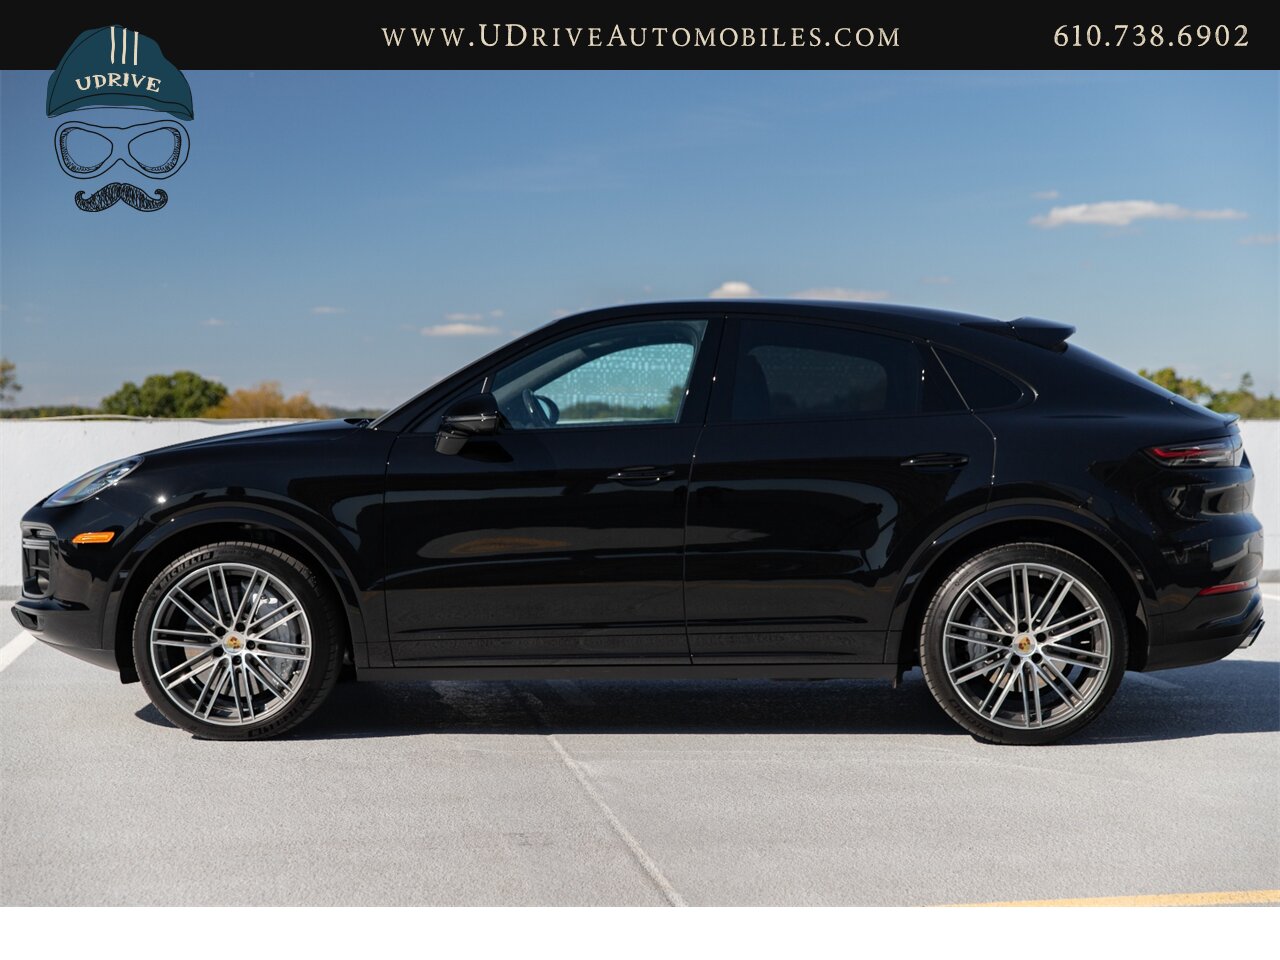 2020 Porsche Cayenne Turbo Coupe 2+1 Rear Comf Seats Prem Plus  22in Turbo Design Whls Sport Exhst Adap Cruise Surround View - Photo 8 - West Chester, PA 19382